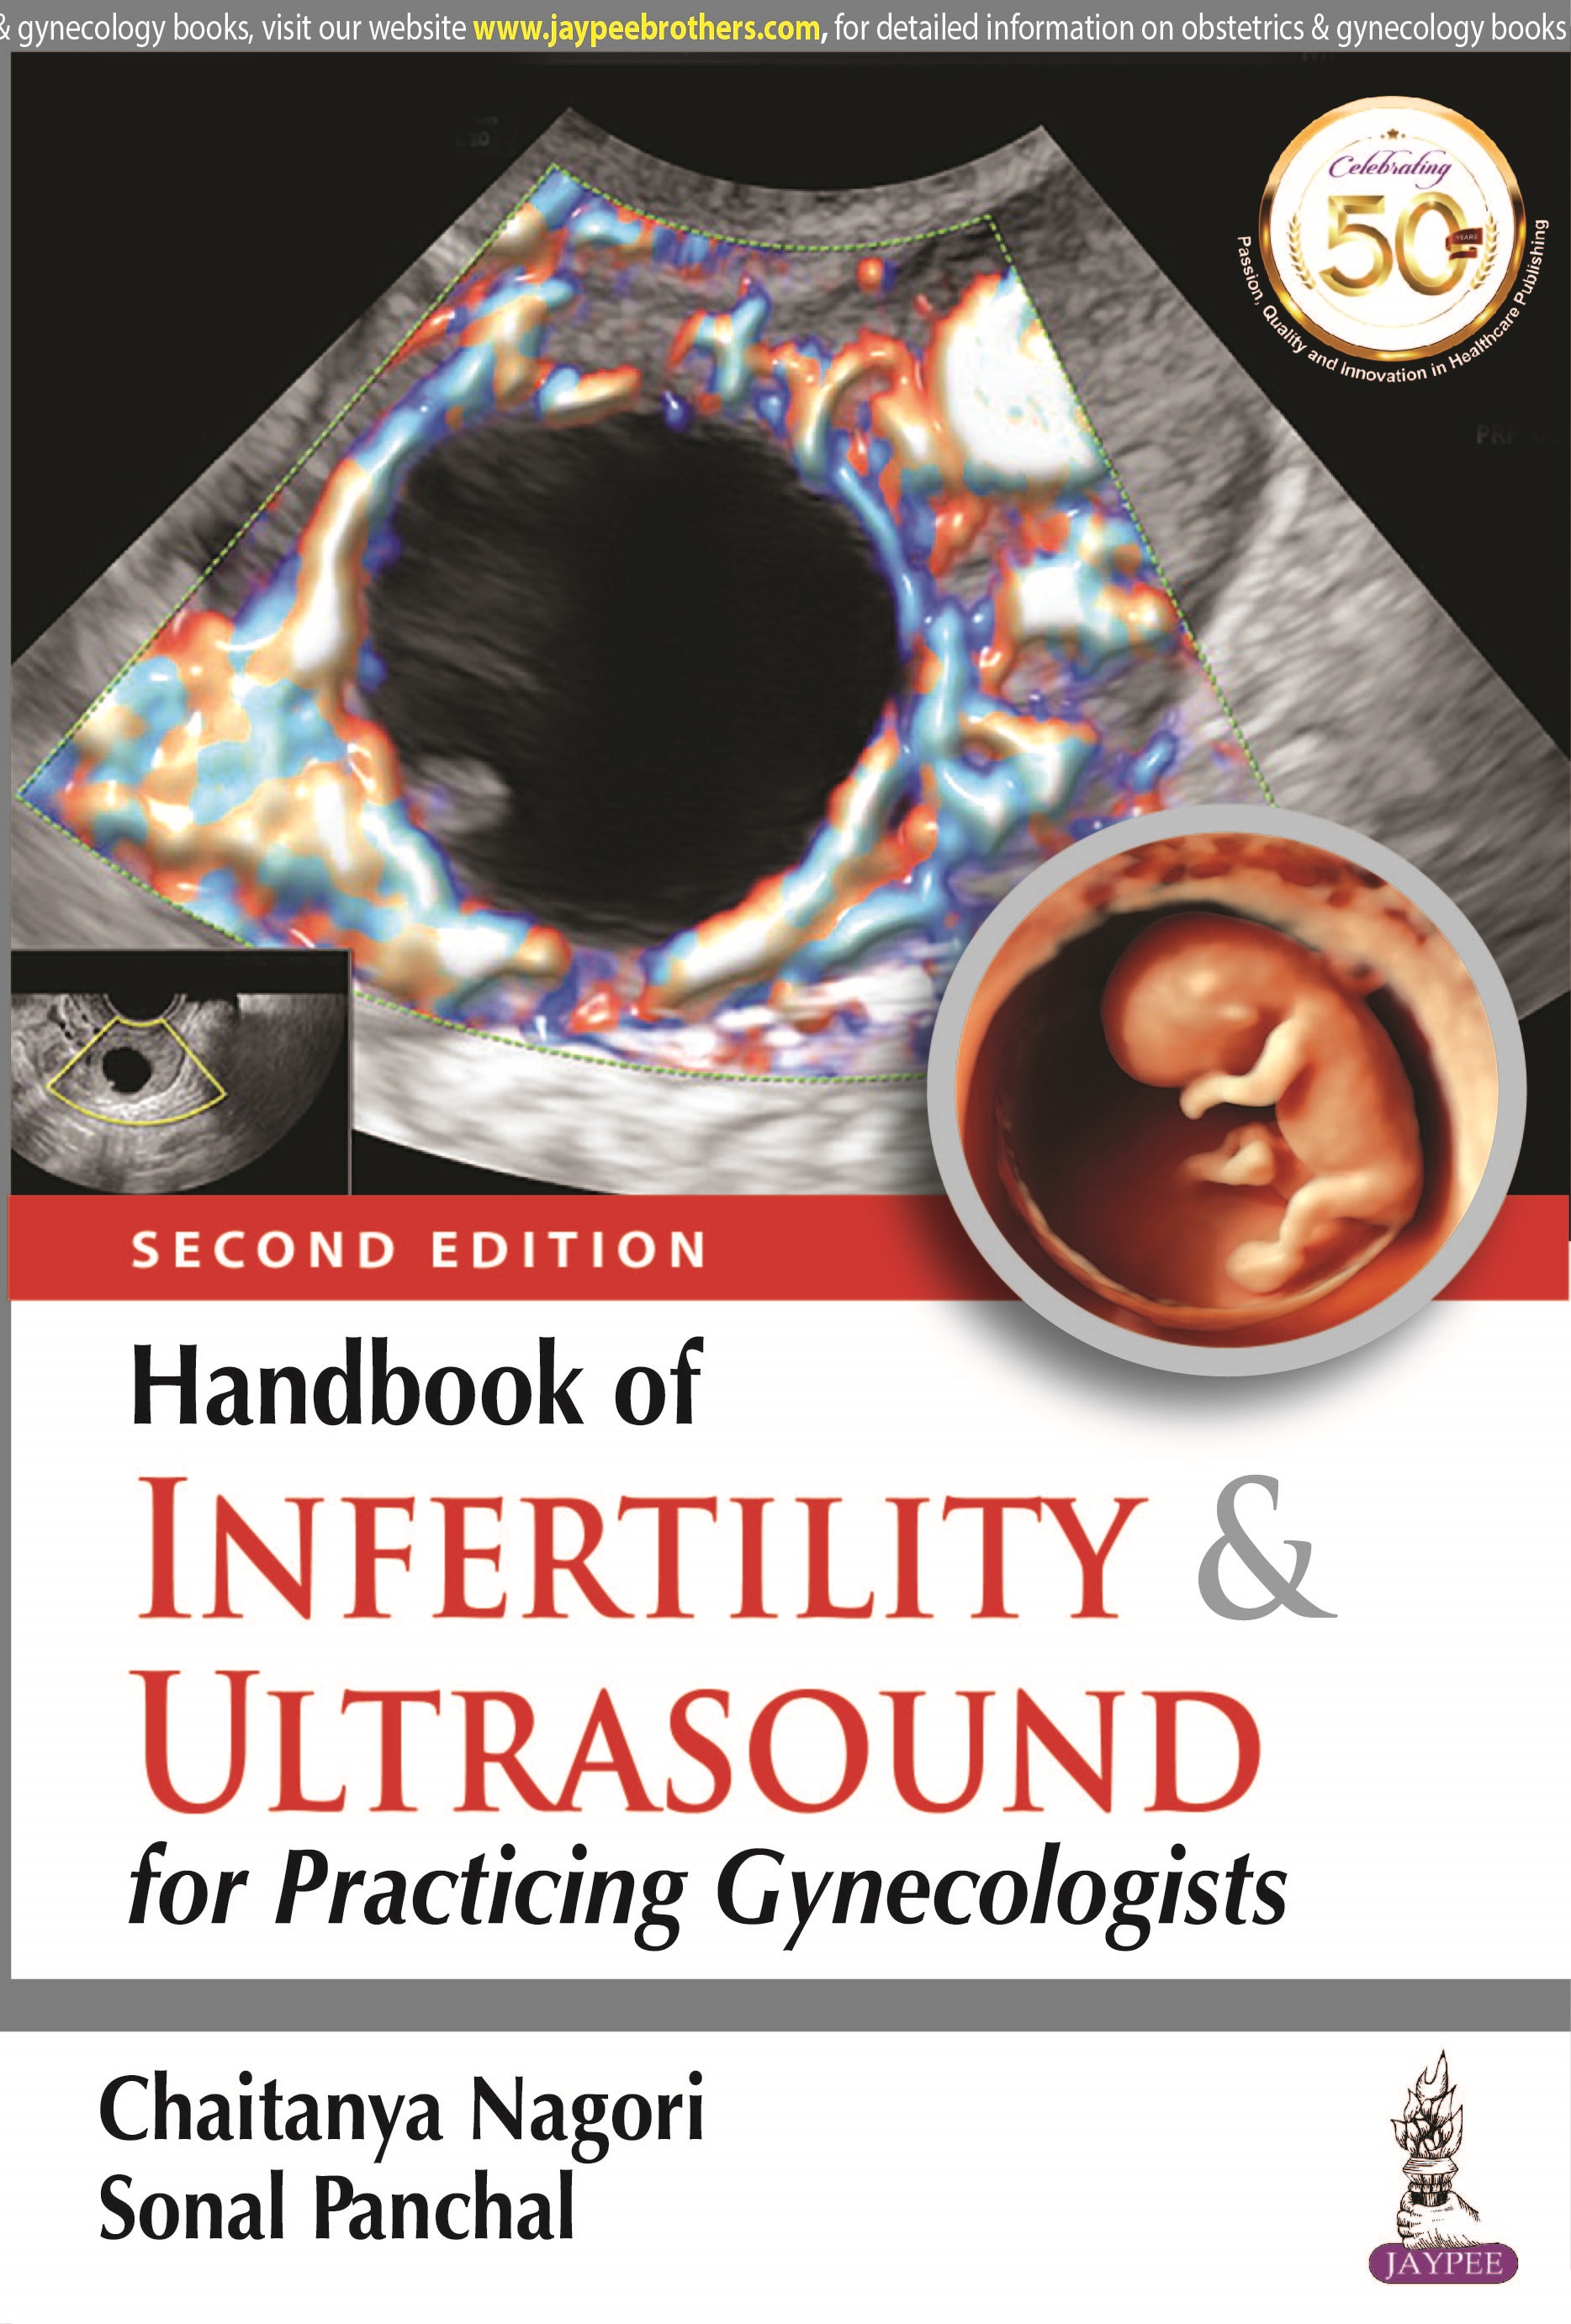 Handbook of Infertility & Ultrasound for Practicing Gynecologists